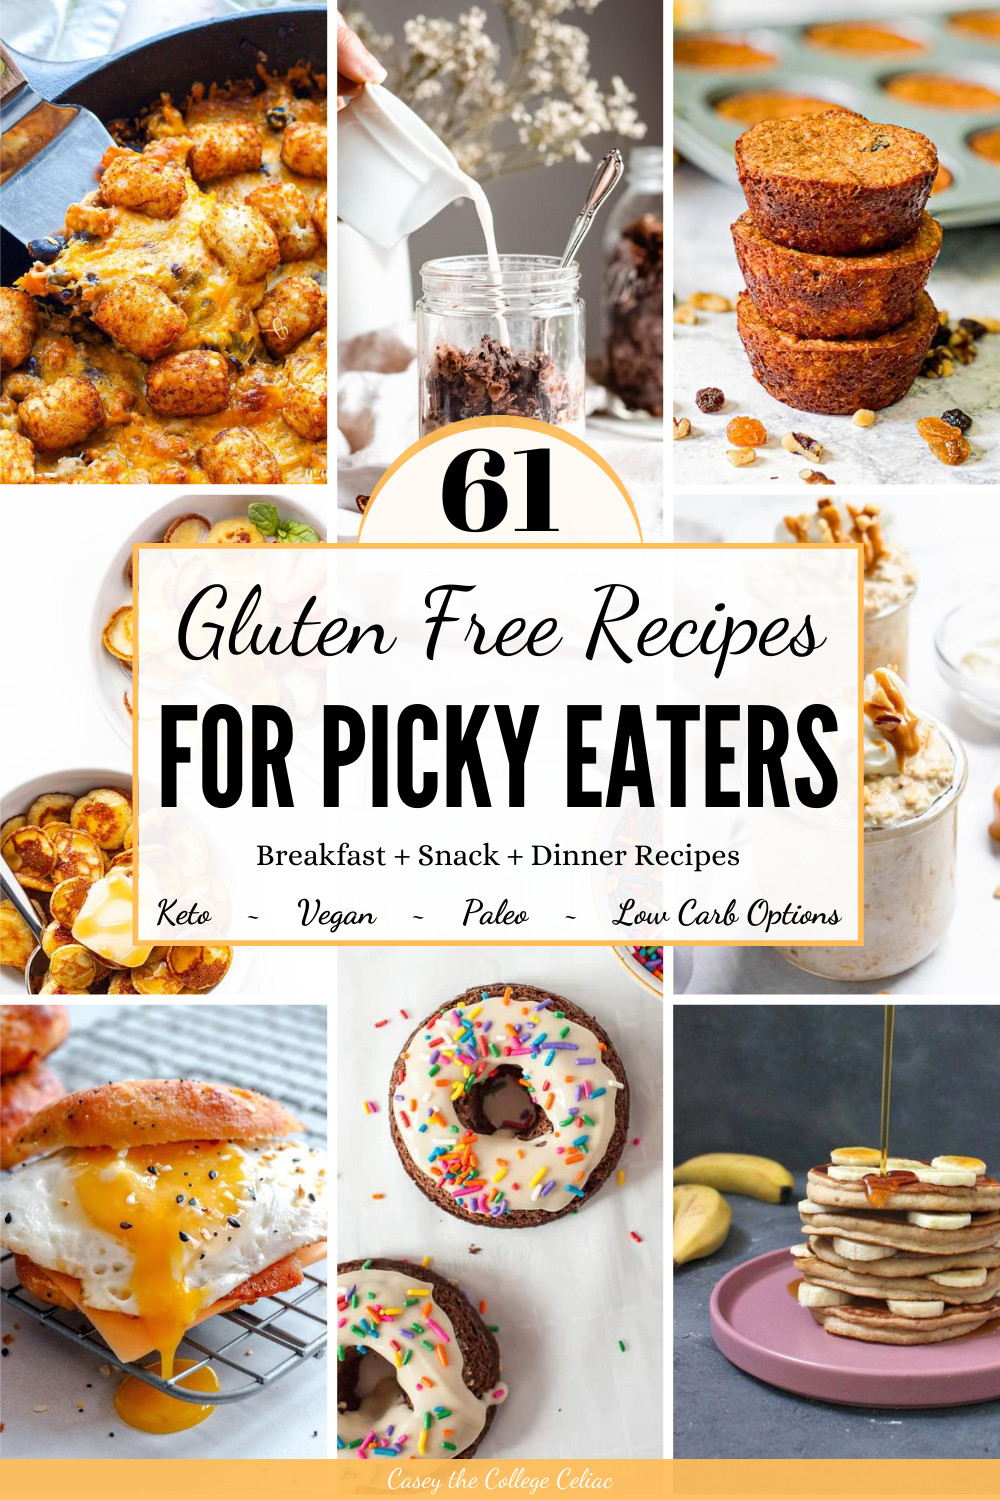 Kid Friendly Dinners For Picky Eaters
 61 Gluten Free Kid Friendly Recipes for Picky Eaters